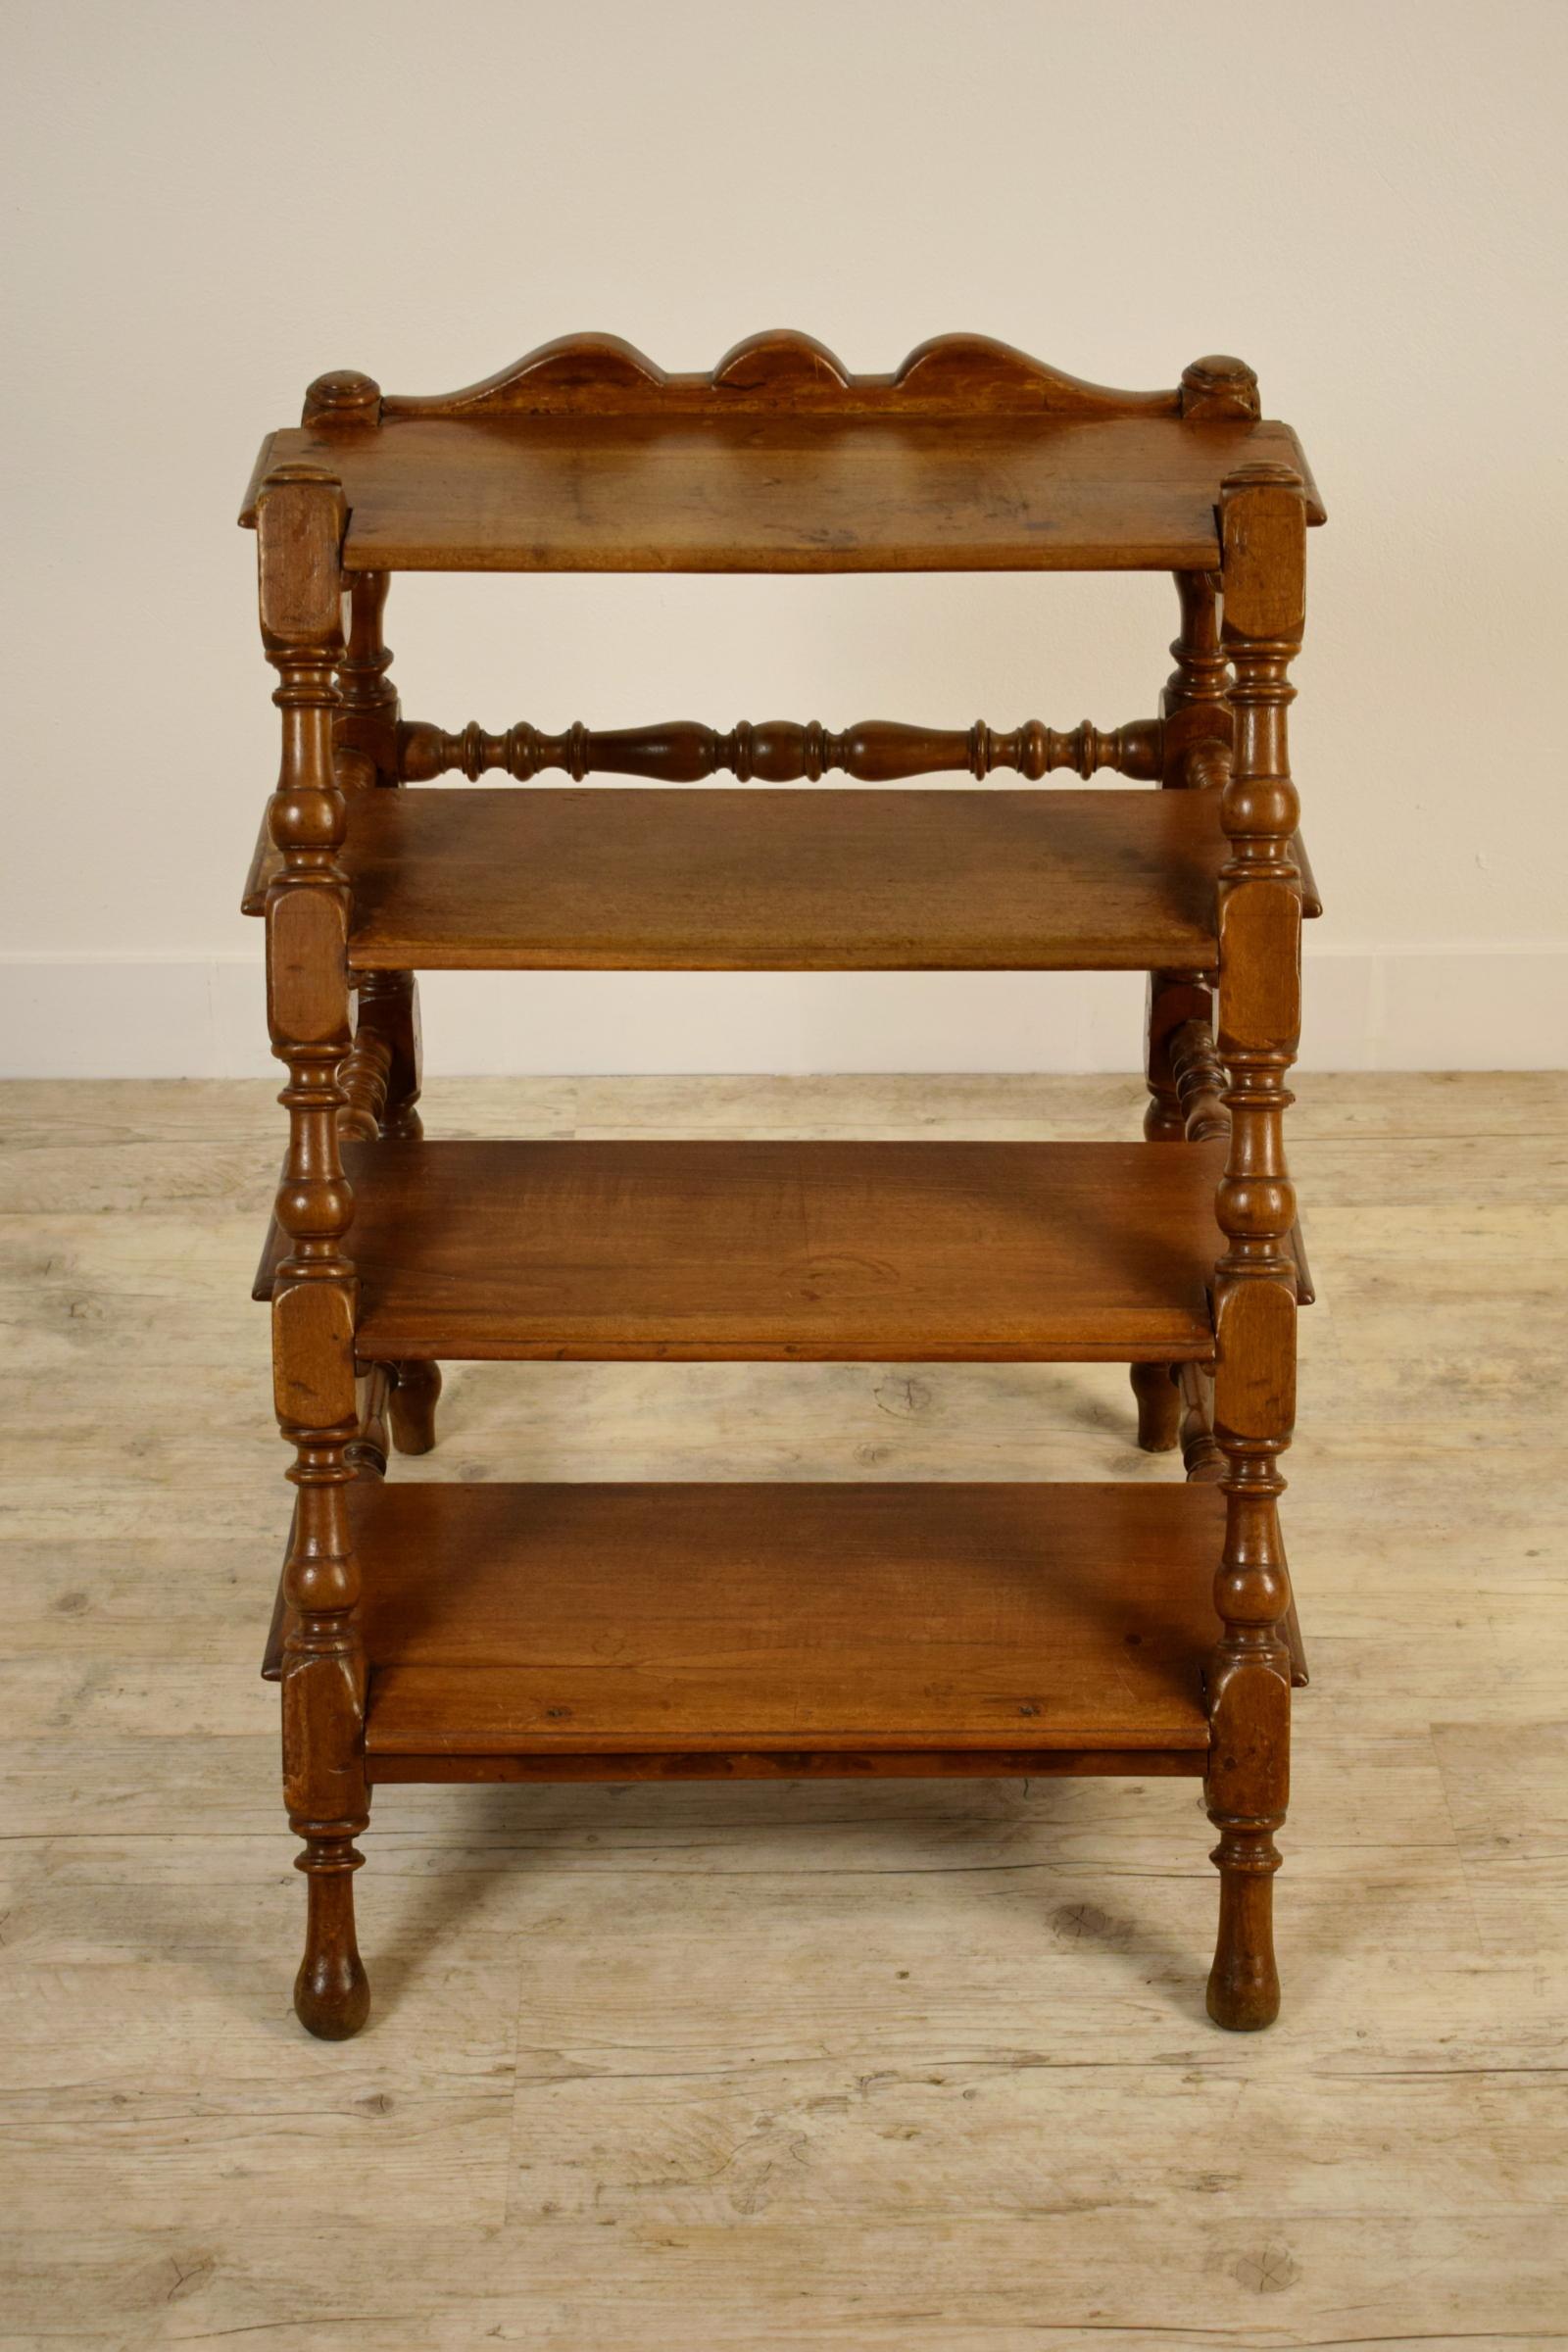 18th Century, Italian Walnut Four Steps Staircase 
Measurements H 84 x W 66 x D 64 (step depth 24) cm

The staircase was built in the eighteenth century in carved solid walnut.
The particular decorative motif is defined as a spool and derives from